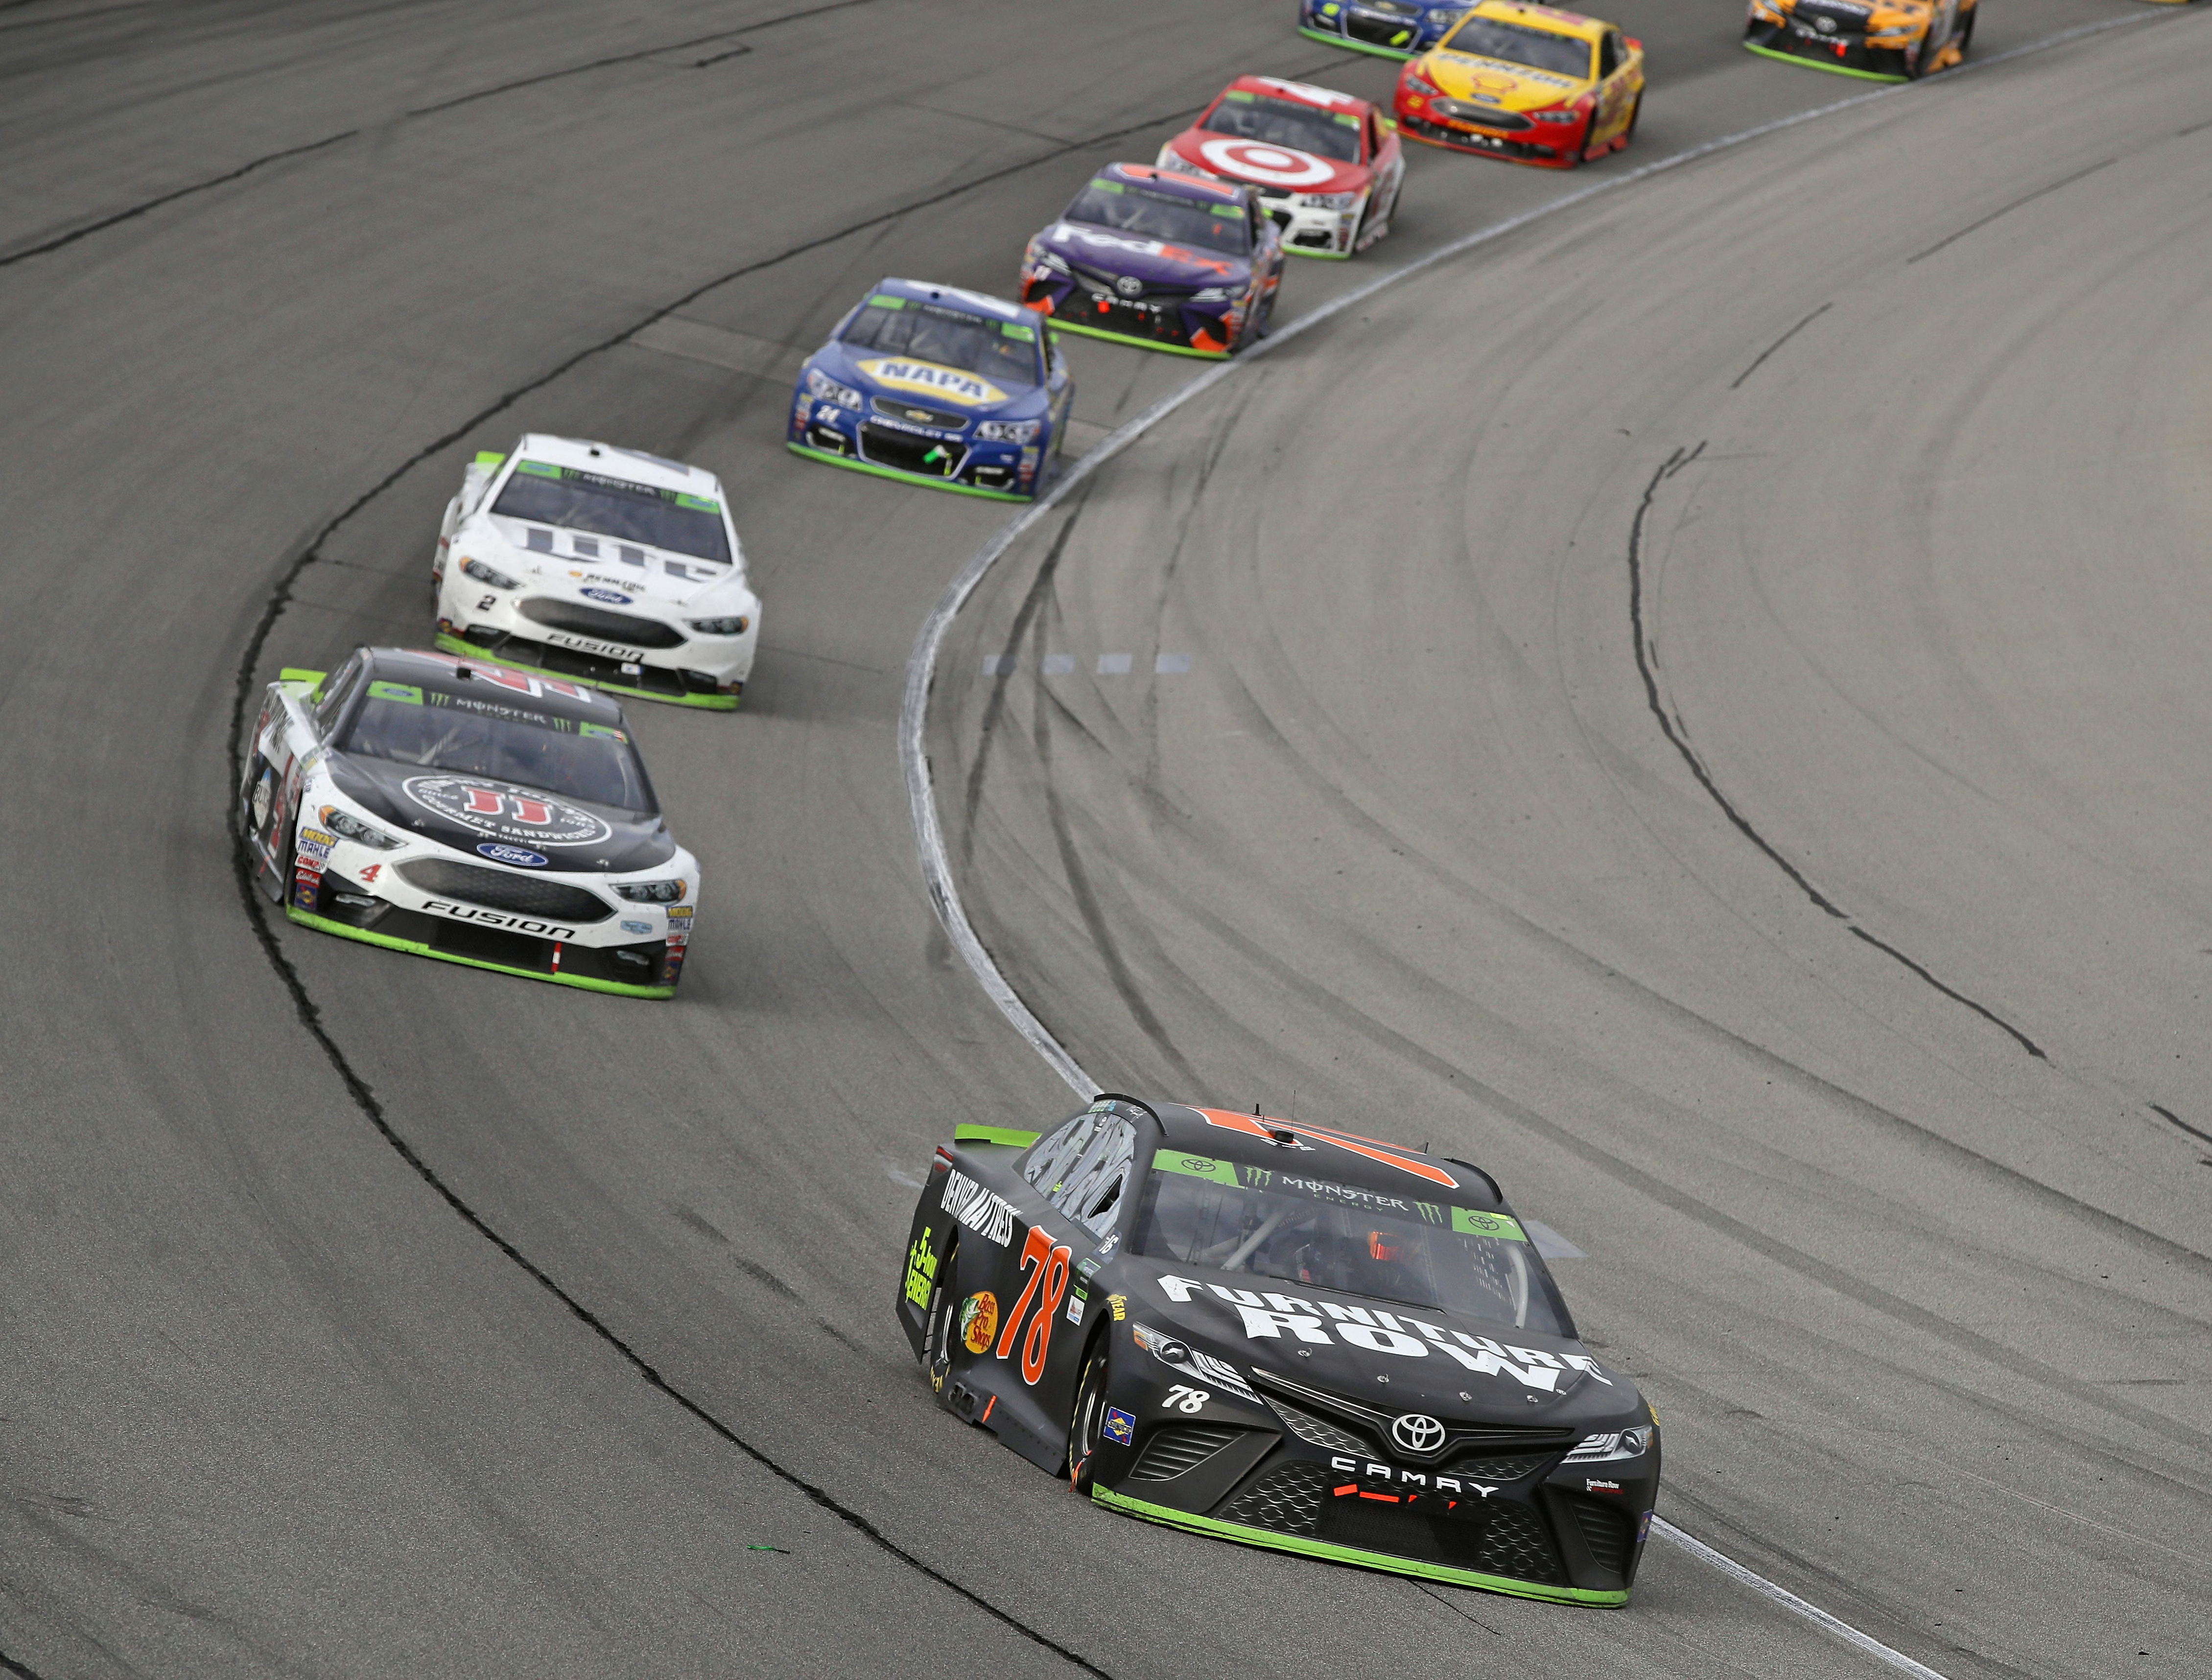 NASCAR Stage Racing Pros and Cons